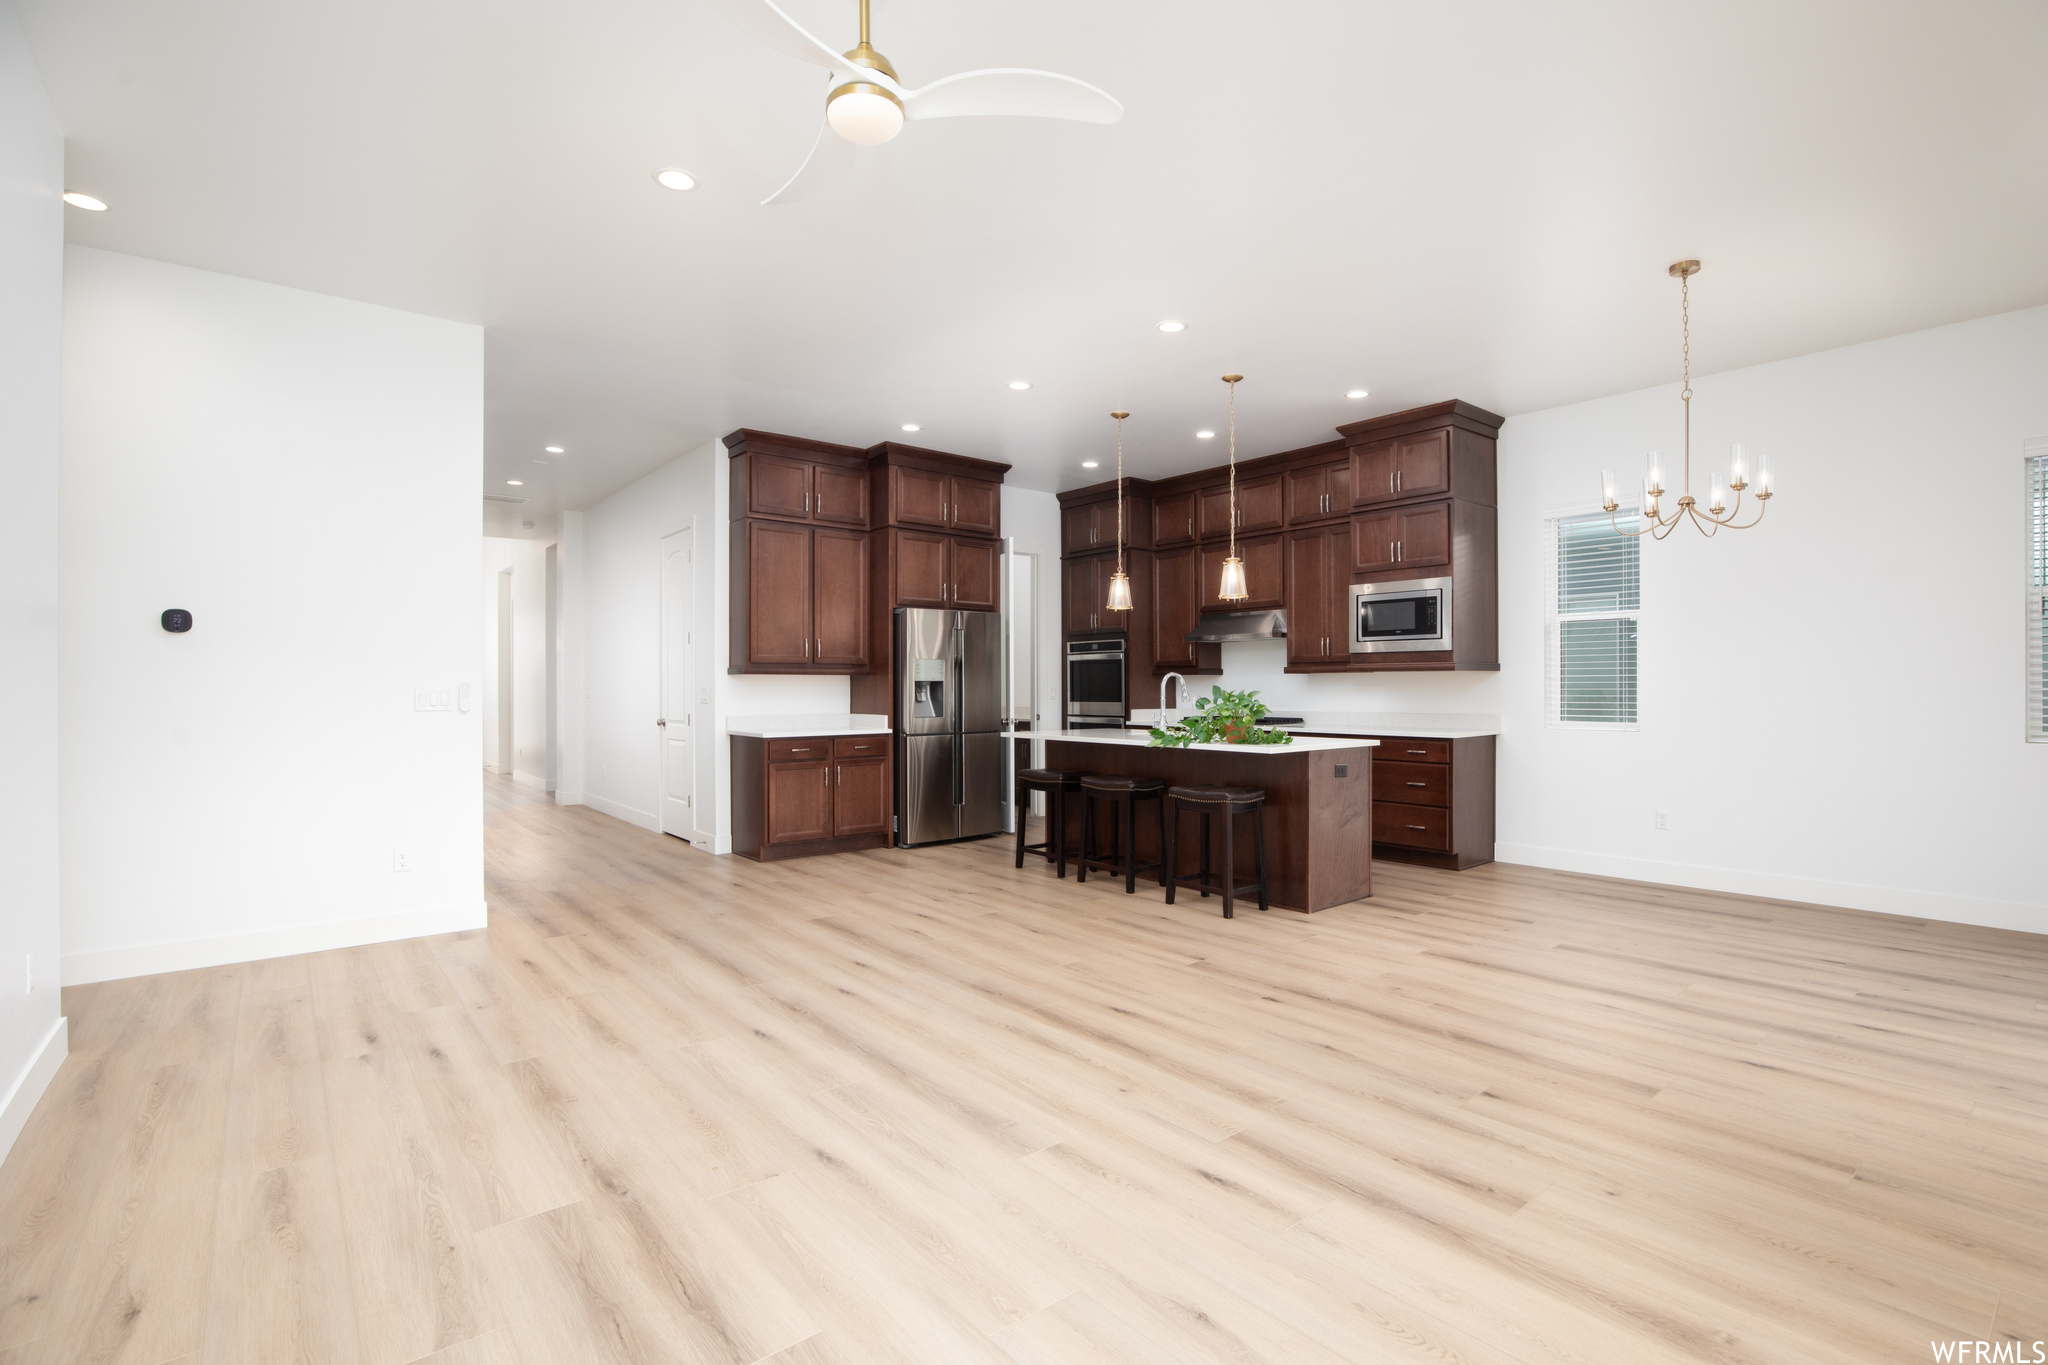 Kitchen with light hardwood / wood-style flooring, a breakfast bar area, hanging light fixtures, and appliances with stainless steel finishes